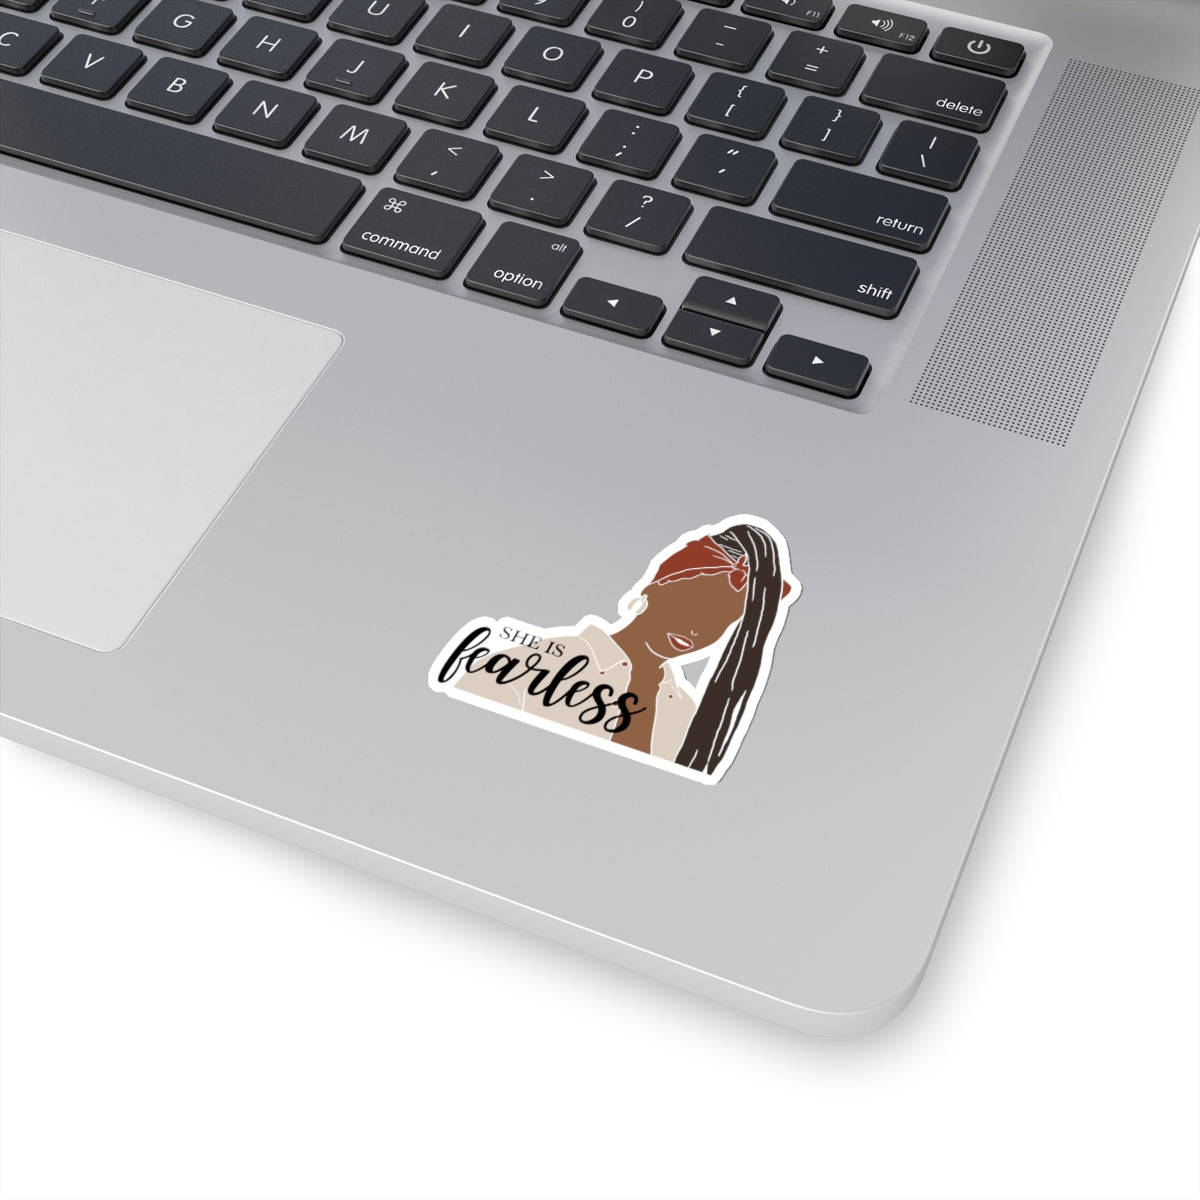 She is Fearless Stickers| Laptop Stickers